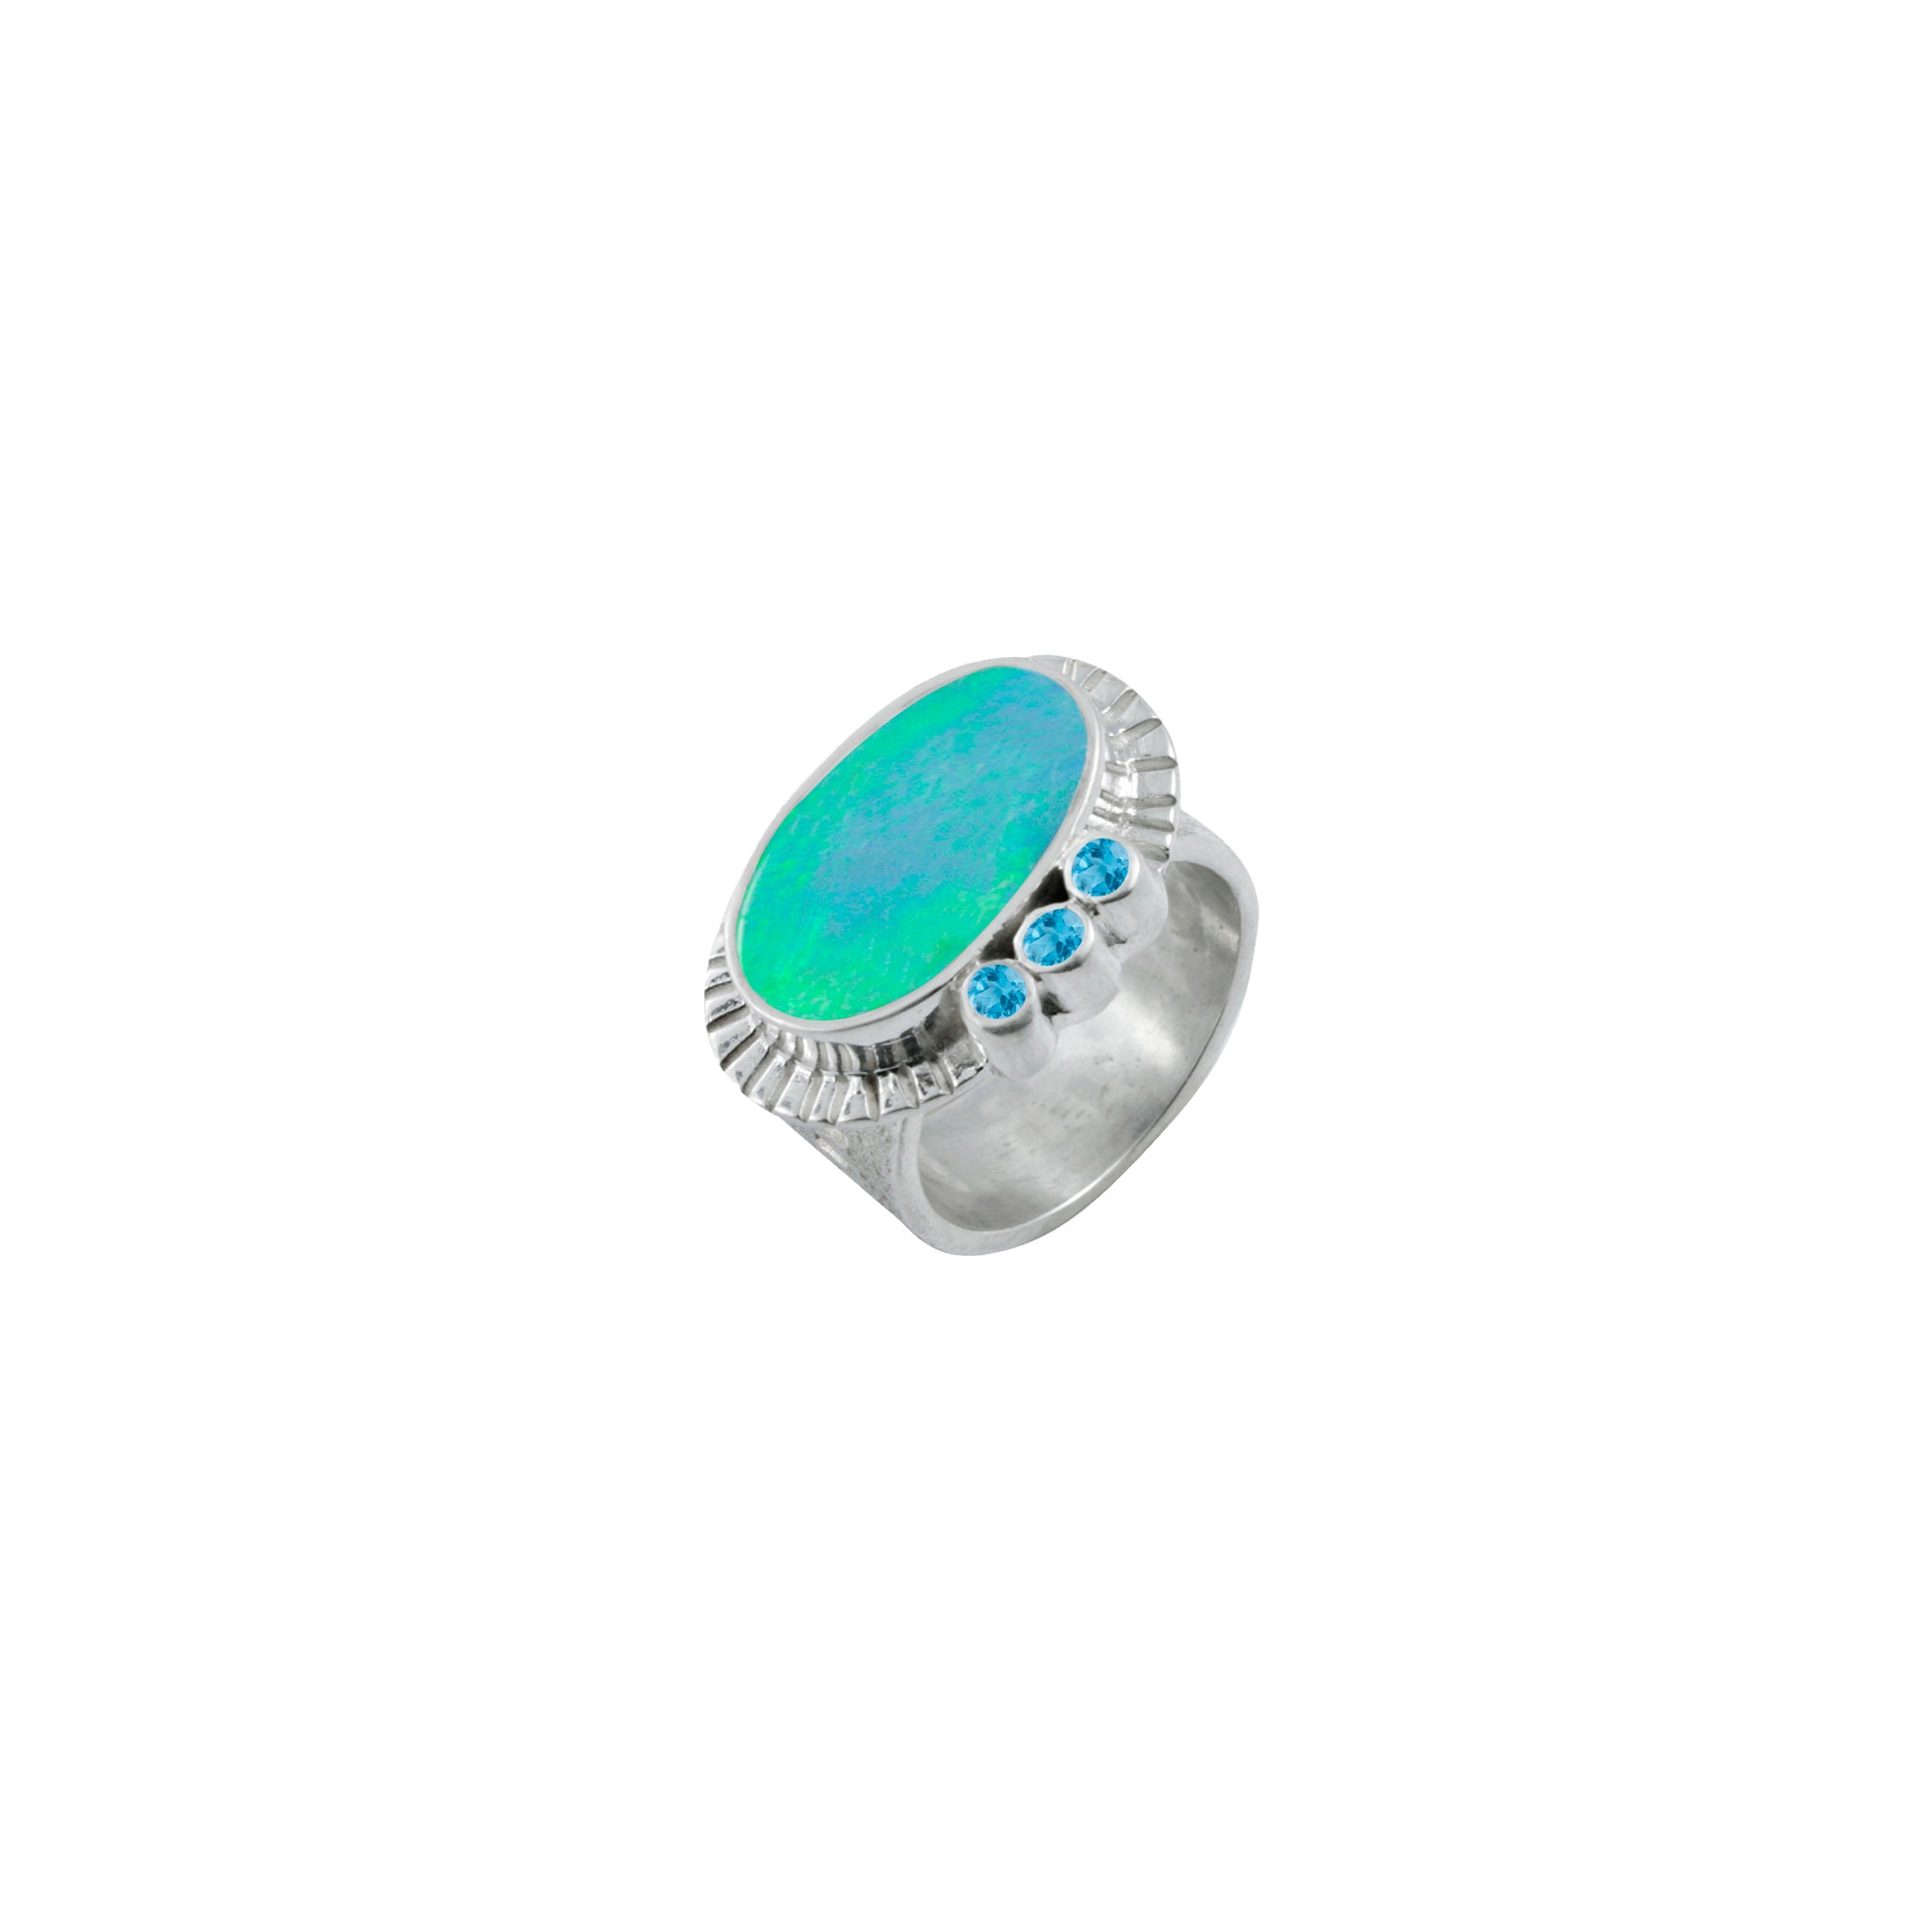 Silver Ring Texture Component With Opal Free Form & Blue Topaz Round